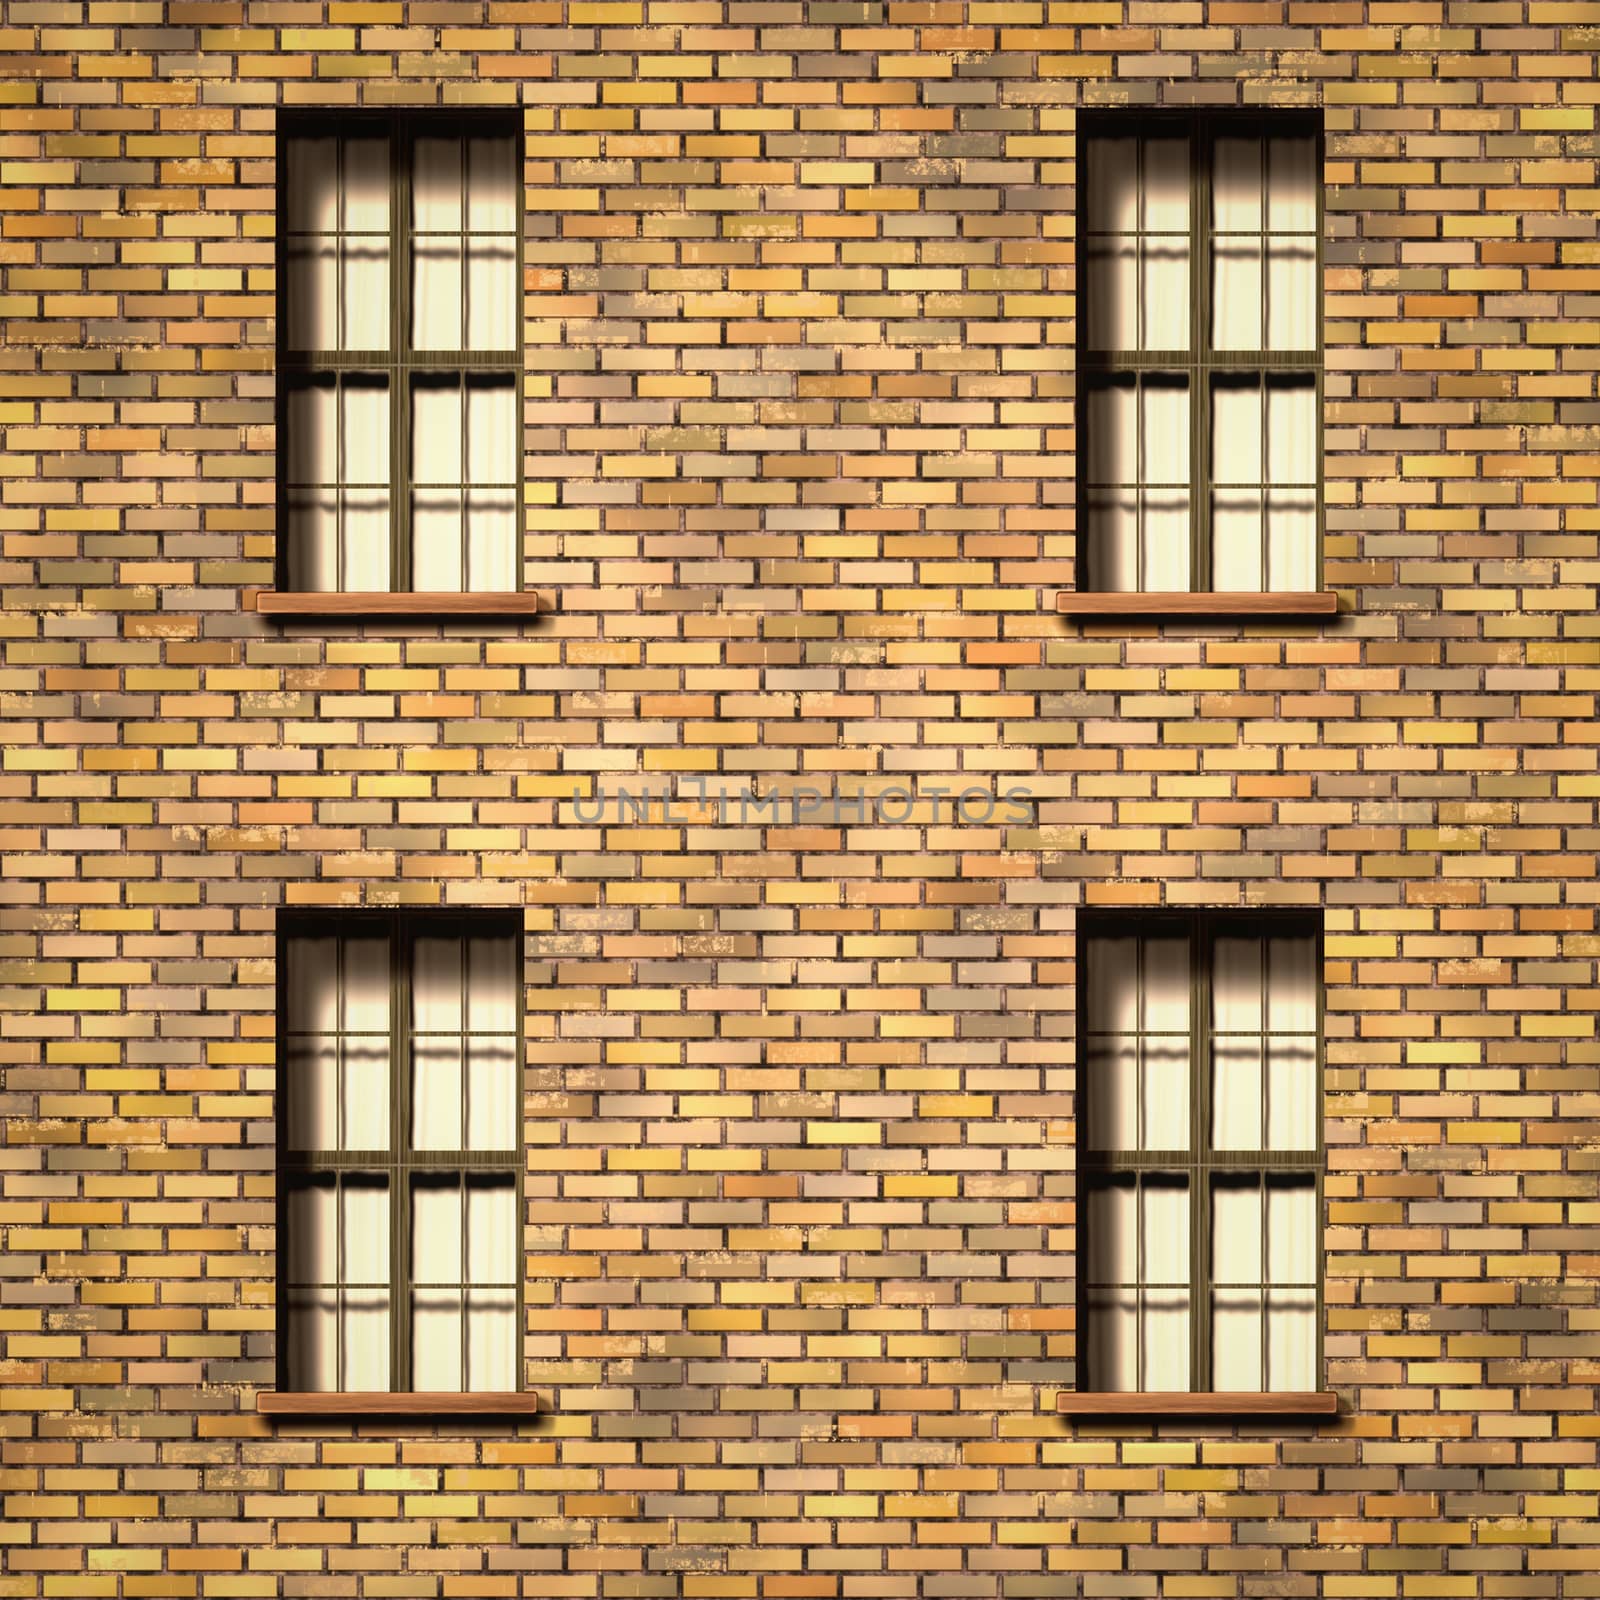 illustration of a brick wall with windows texture